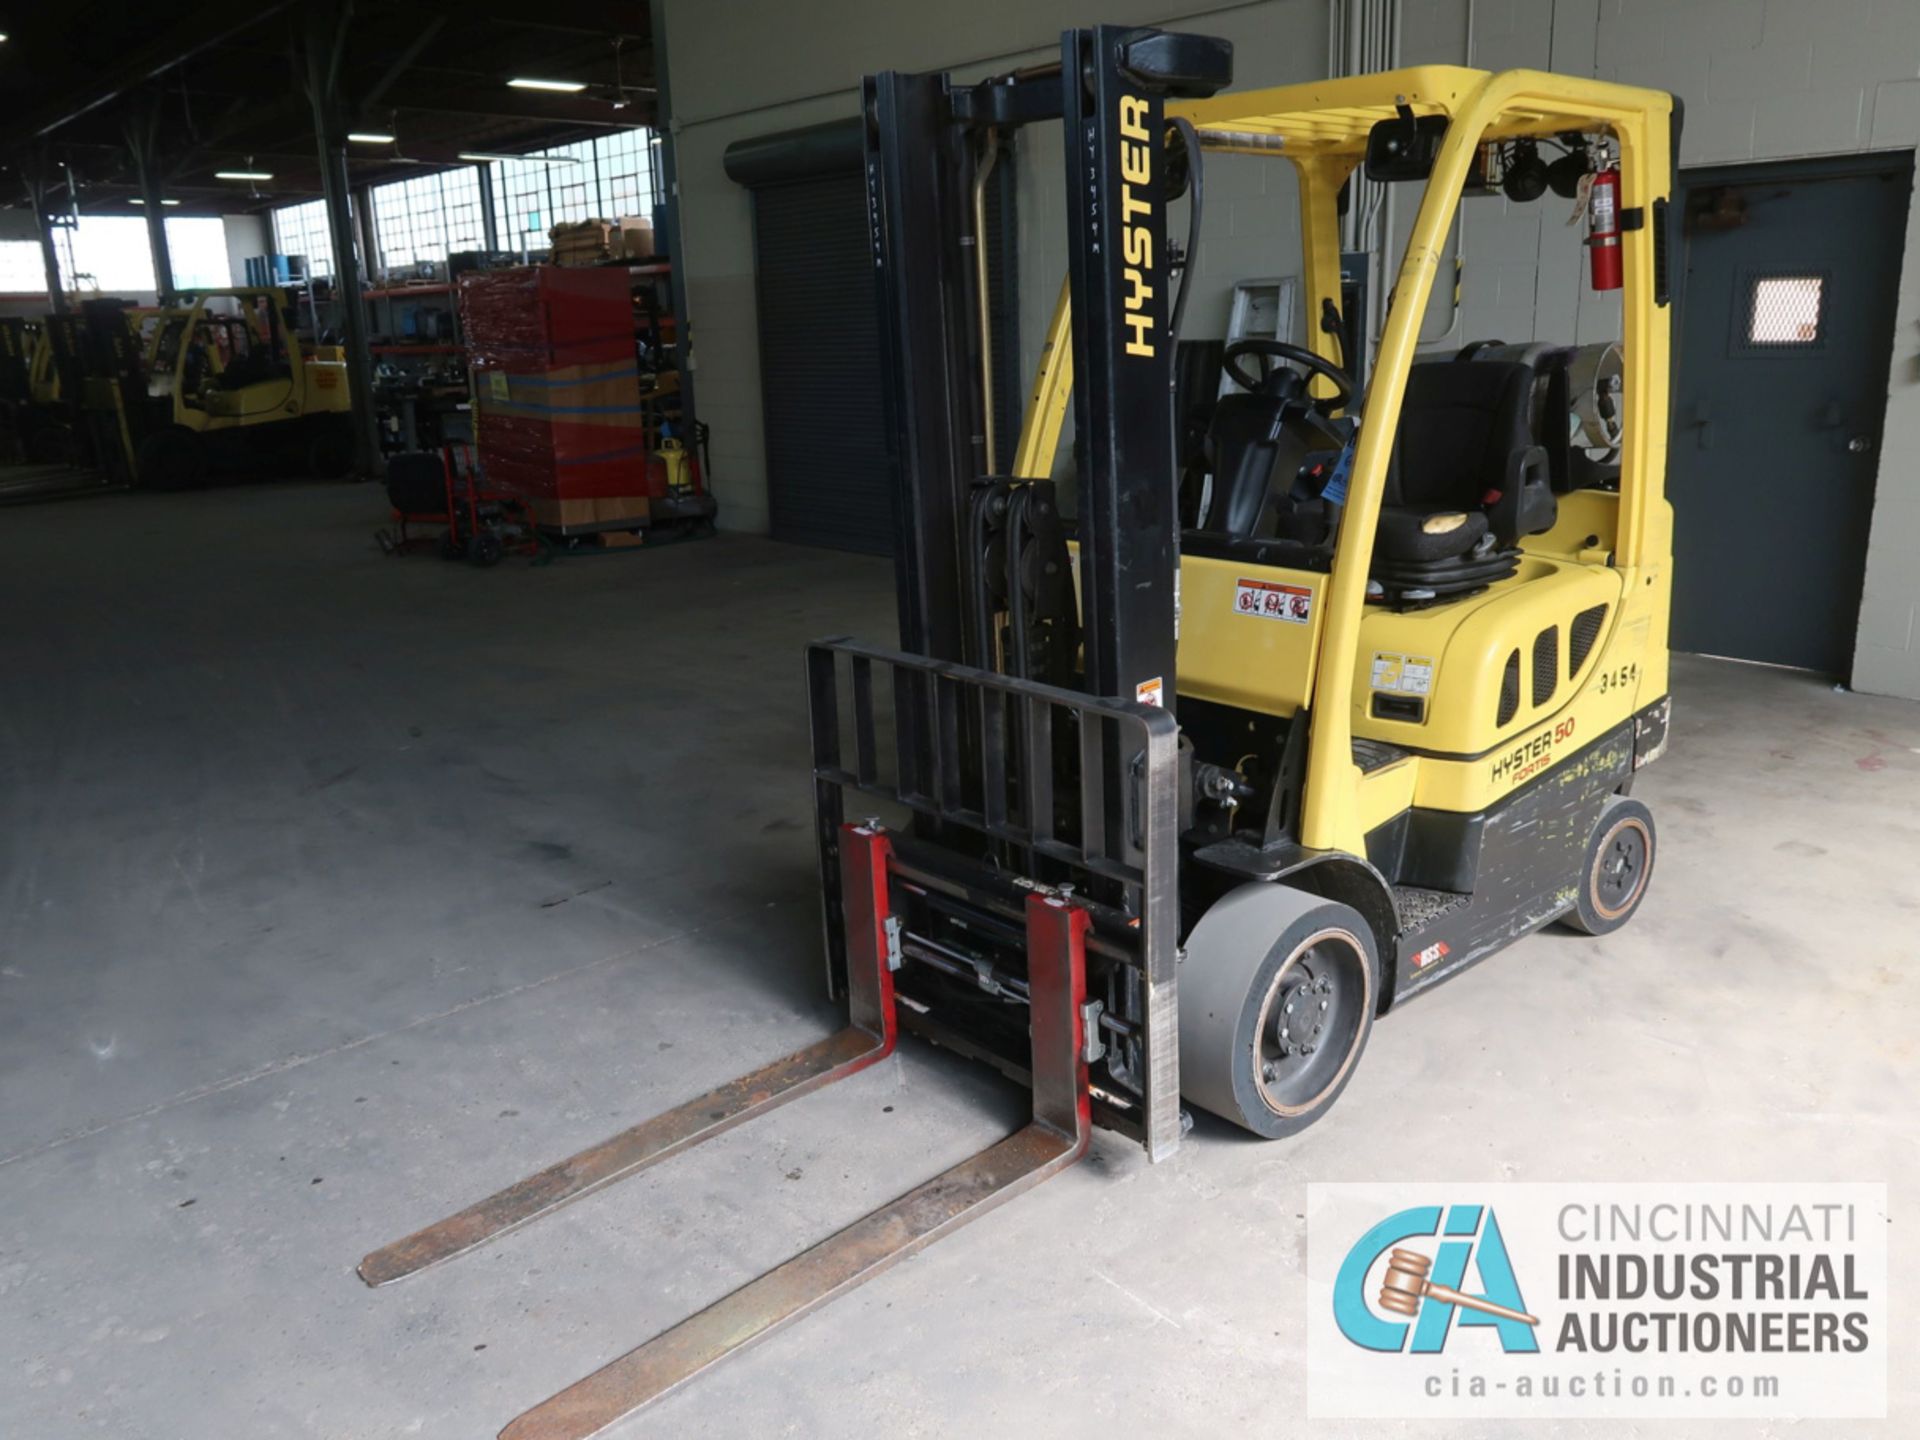 5,000 LB HYSTER MODEL S50FT LP GAS SOLID TIRE LIFT TRUCK WITH 2-STAGE MAST, 130" LIFT HEIGHT, 80"